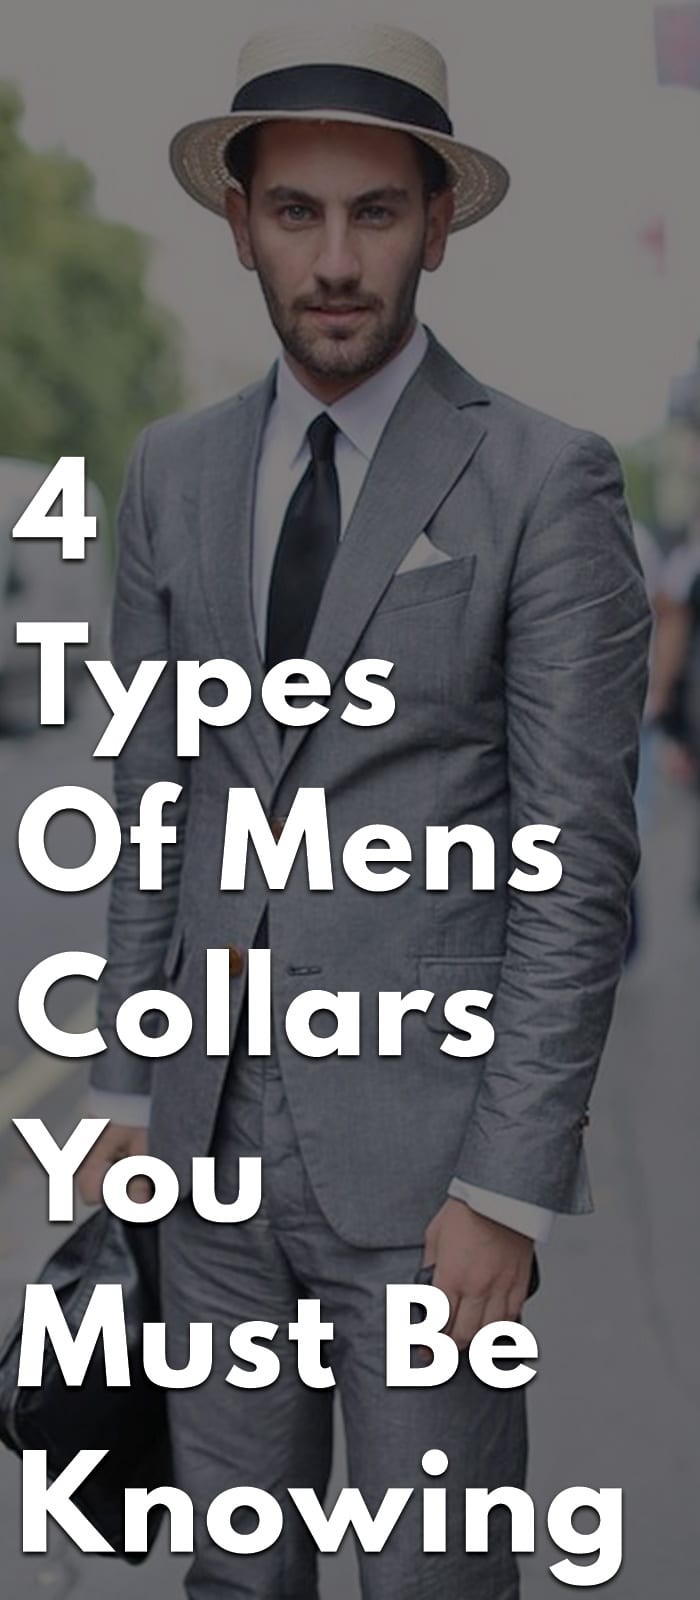 4-Types-of-Mens-Collars-You-Must-Be-Knowing